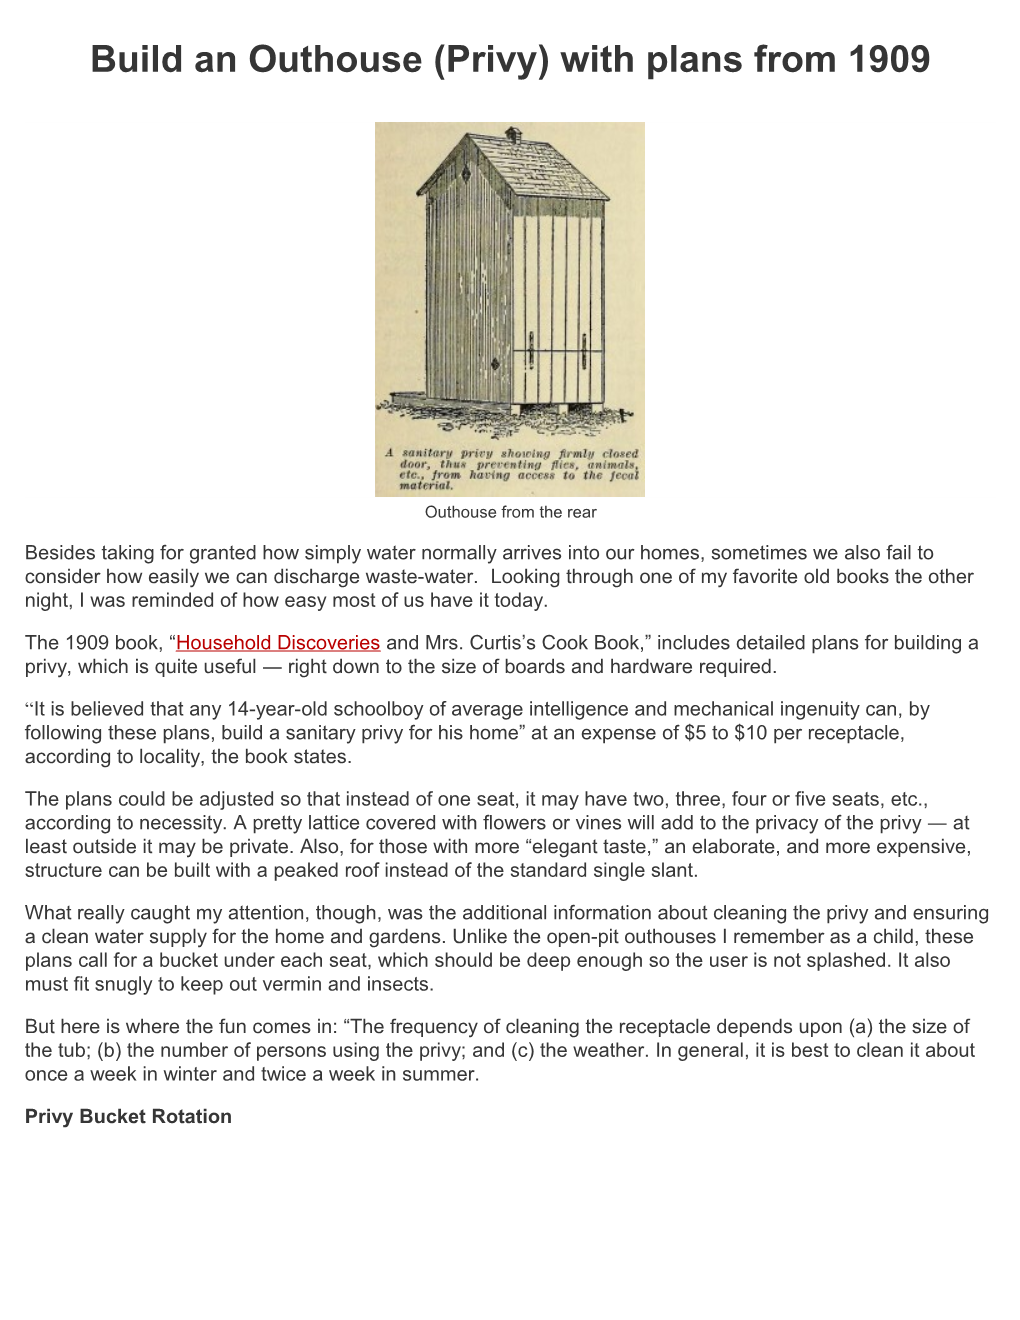 Build an Outhouse (Privy) with Plans from 1909